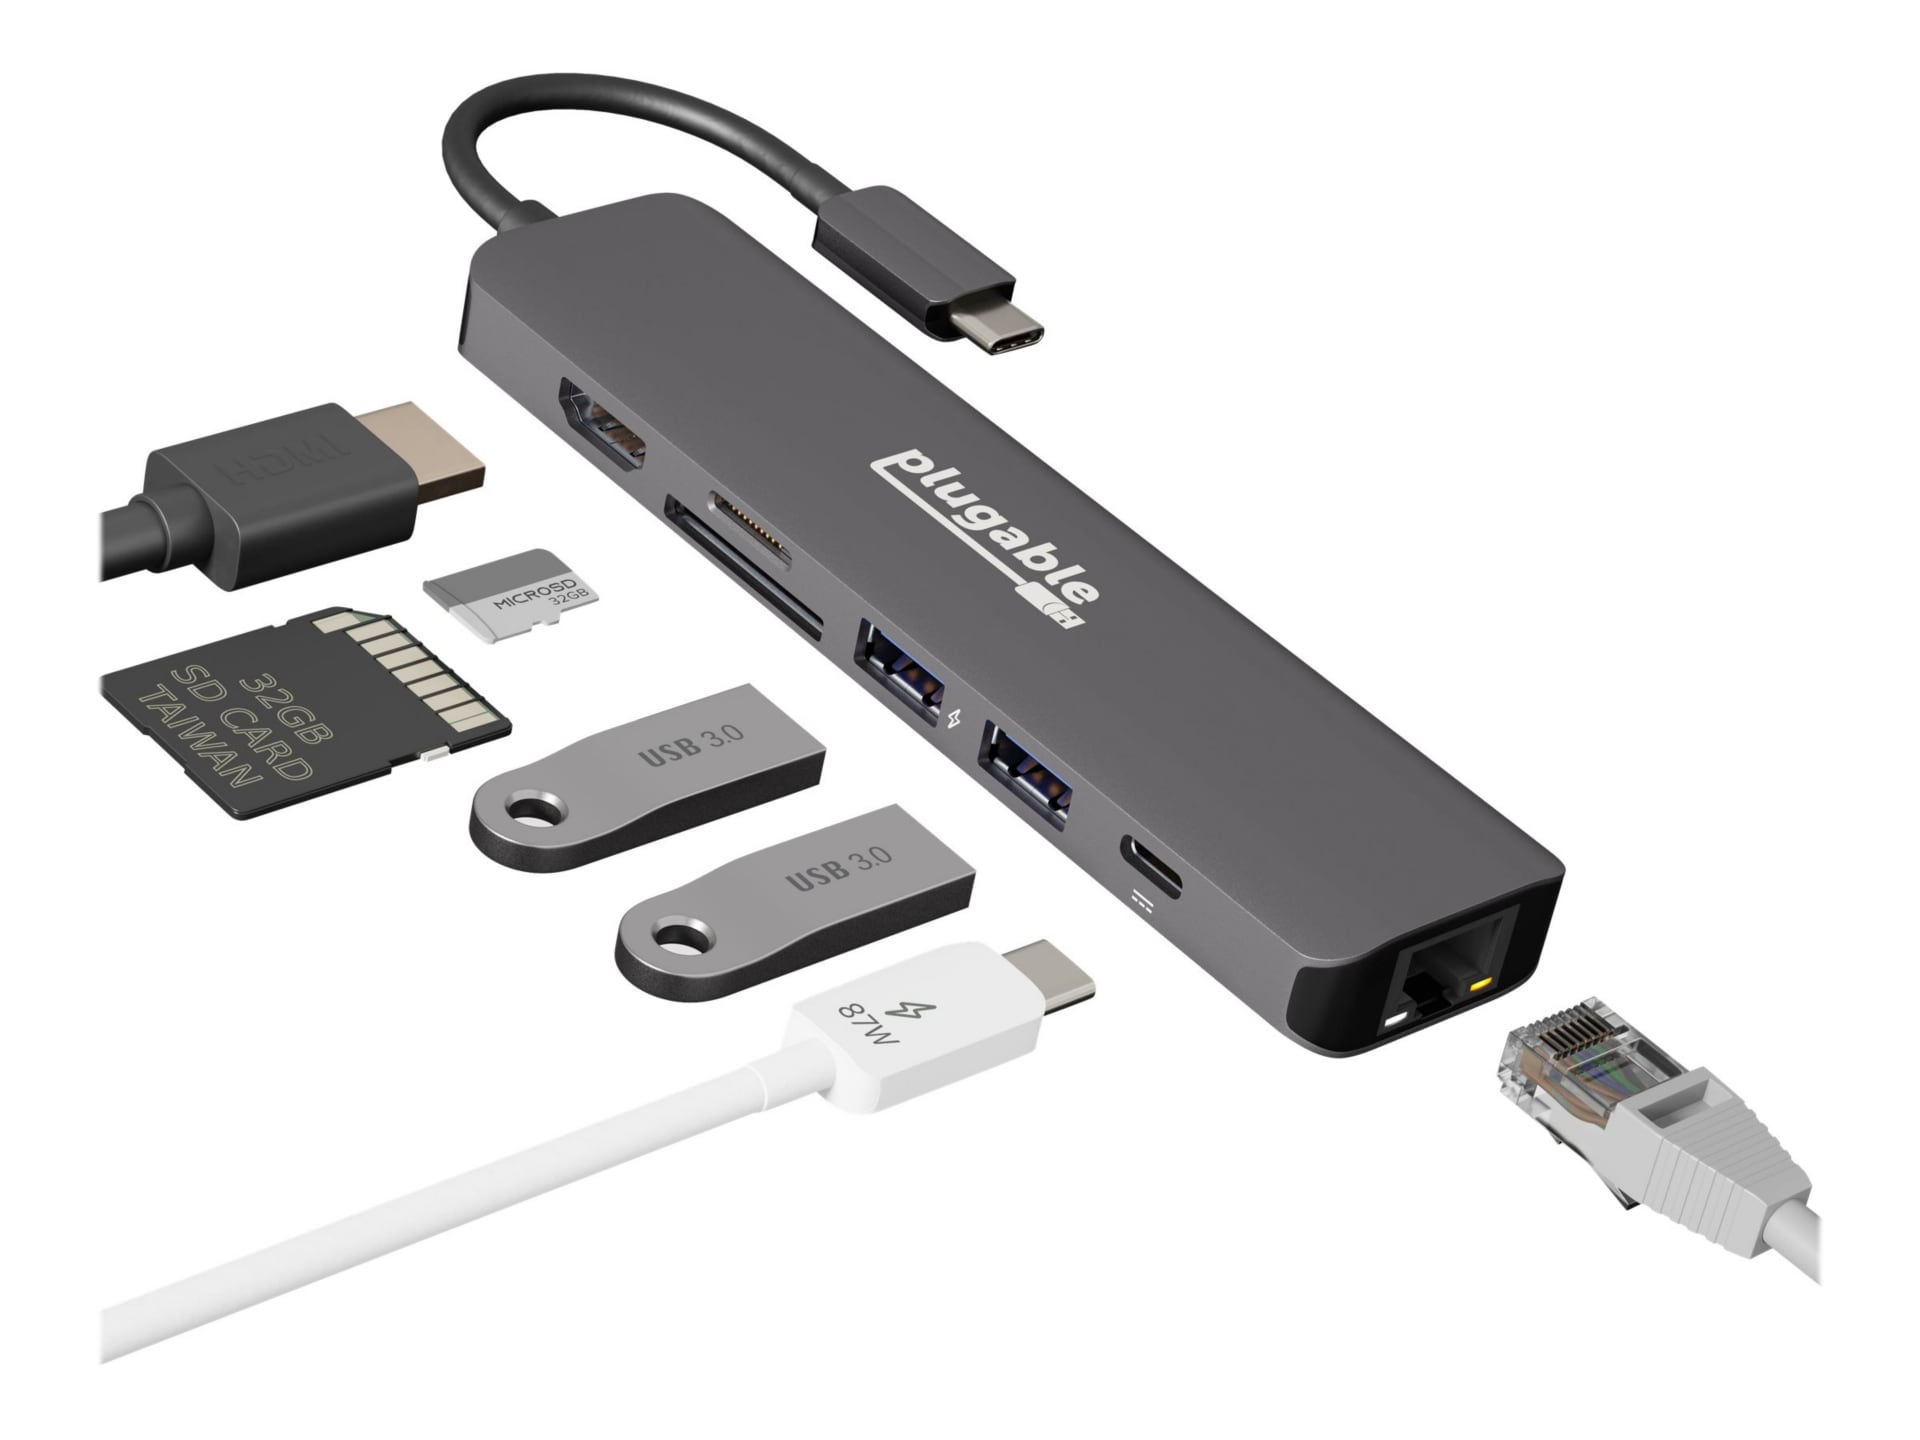 Plugable 7-in-1 USB C Hub Multiport Adapter with Ethernet - 100W Charging